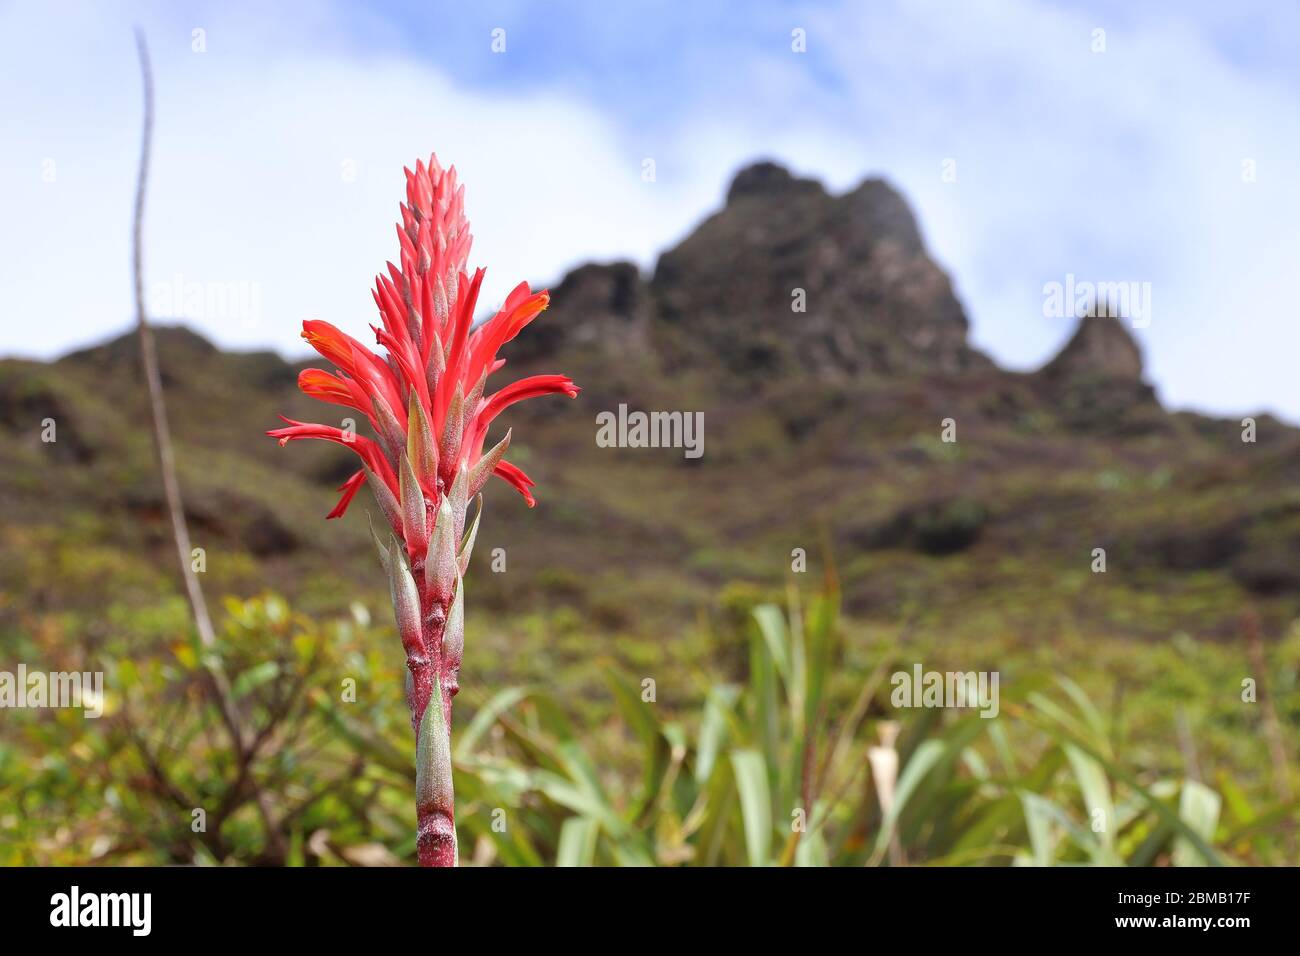 Bromeliad plant in Guadeloupe - Pitcairnia bifrons species. La Soufriere volcano in background. Stock Photo